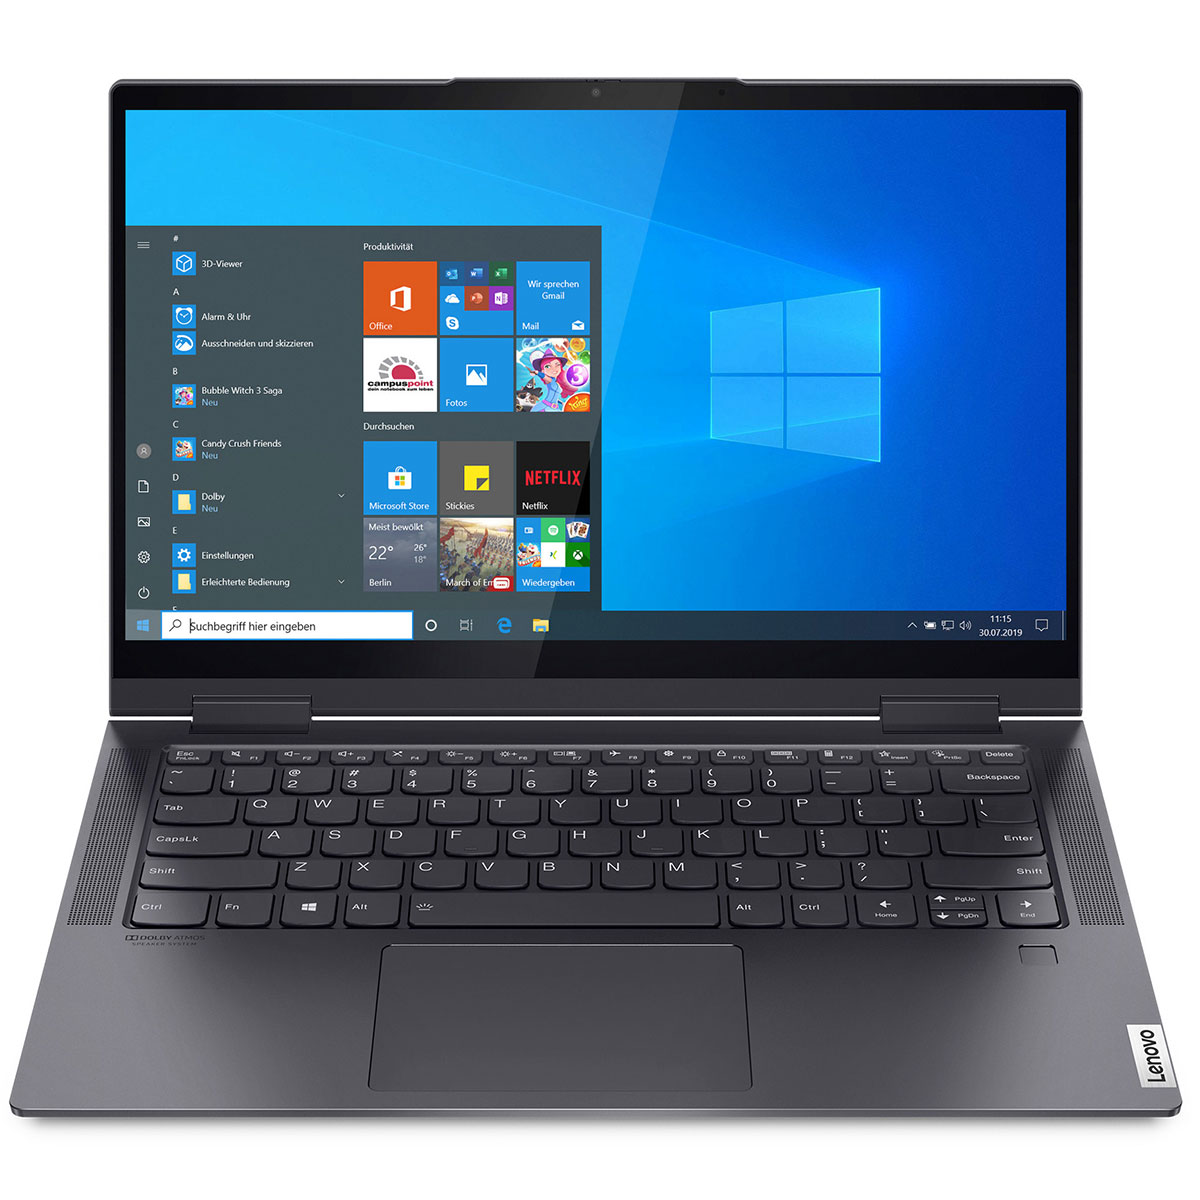 https://www.mombasacomputers.com/wp-content/uploads/2022/05/Lenovo-Yoga-7-14ITL5-2-in-1-Intel-Core-i7-11th-Gen-16GB-RAM-512GB-SSD-14-14-Inches-FHD-Multi-Touch-Display-Windows-11-Home.jpg